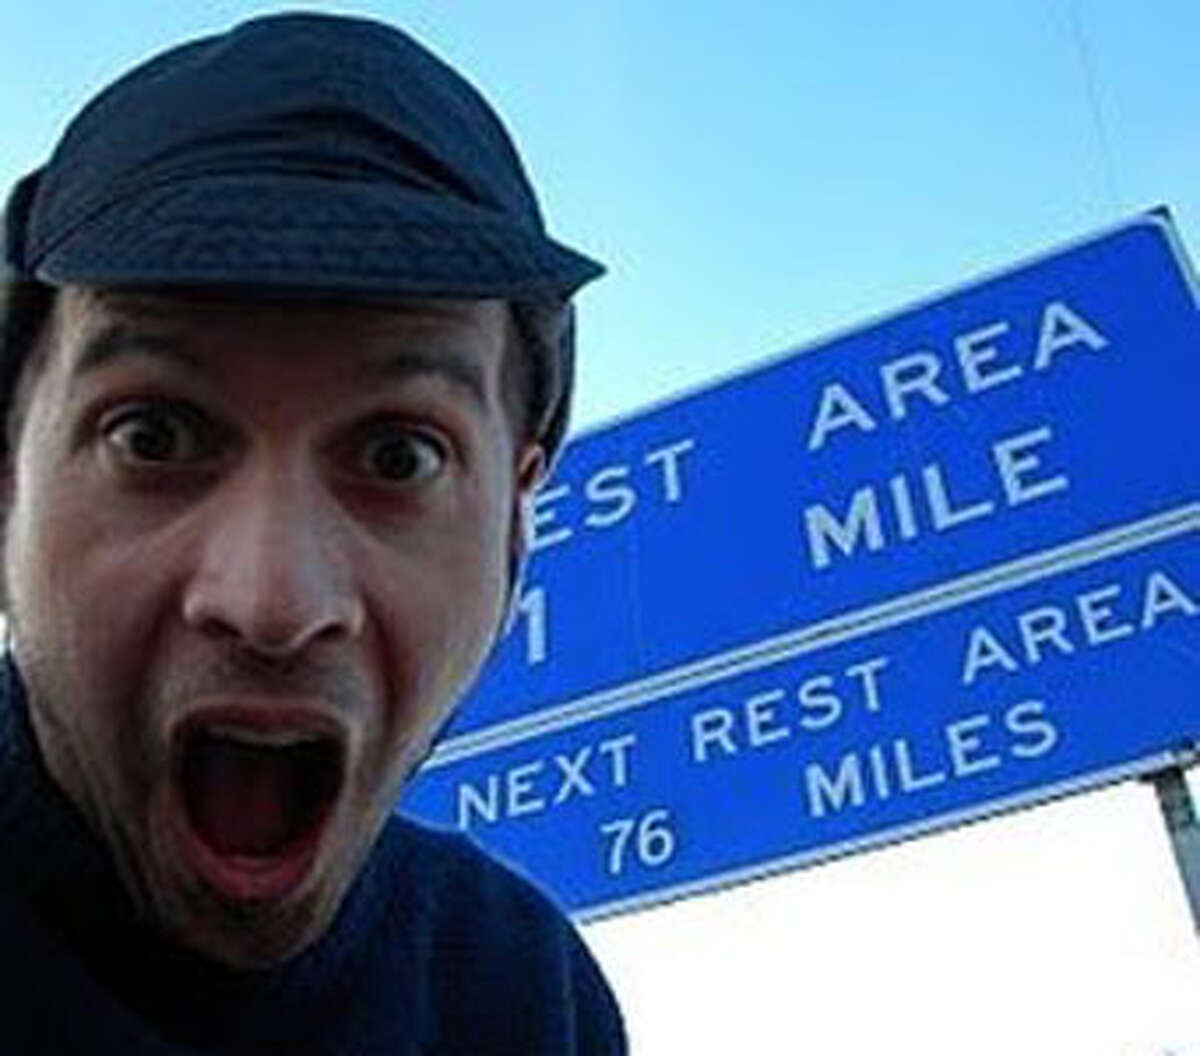 S. Matt Read wants to walk the perimeter of Texas by this summer. He chronicles his journey around Texas and the hits his body takes by way of his online blog, http://texasperimeterhike.blogspot.com/ Photo courtesy of S. Matt Read